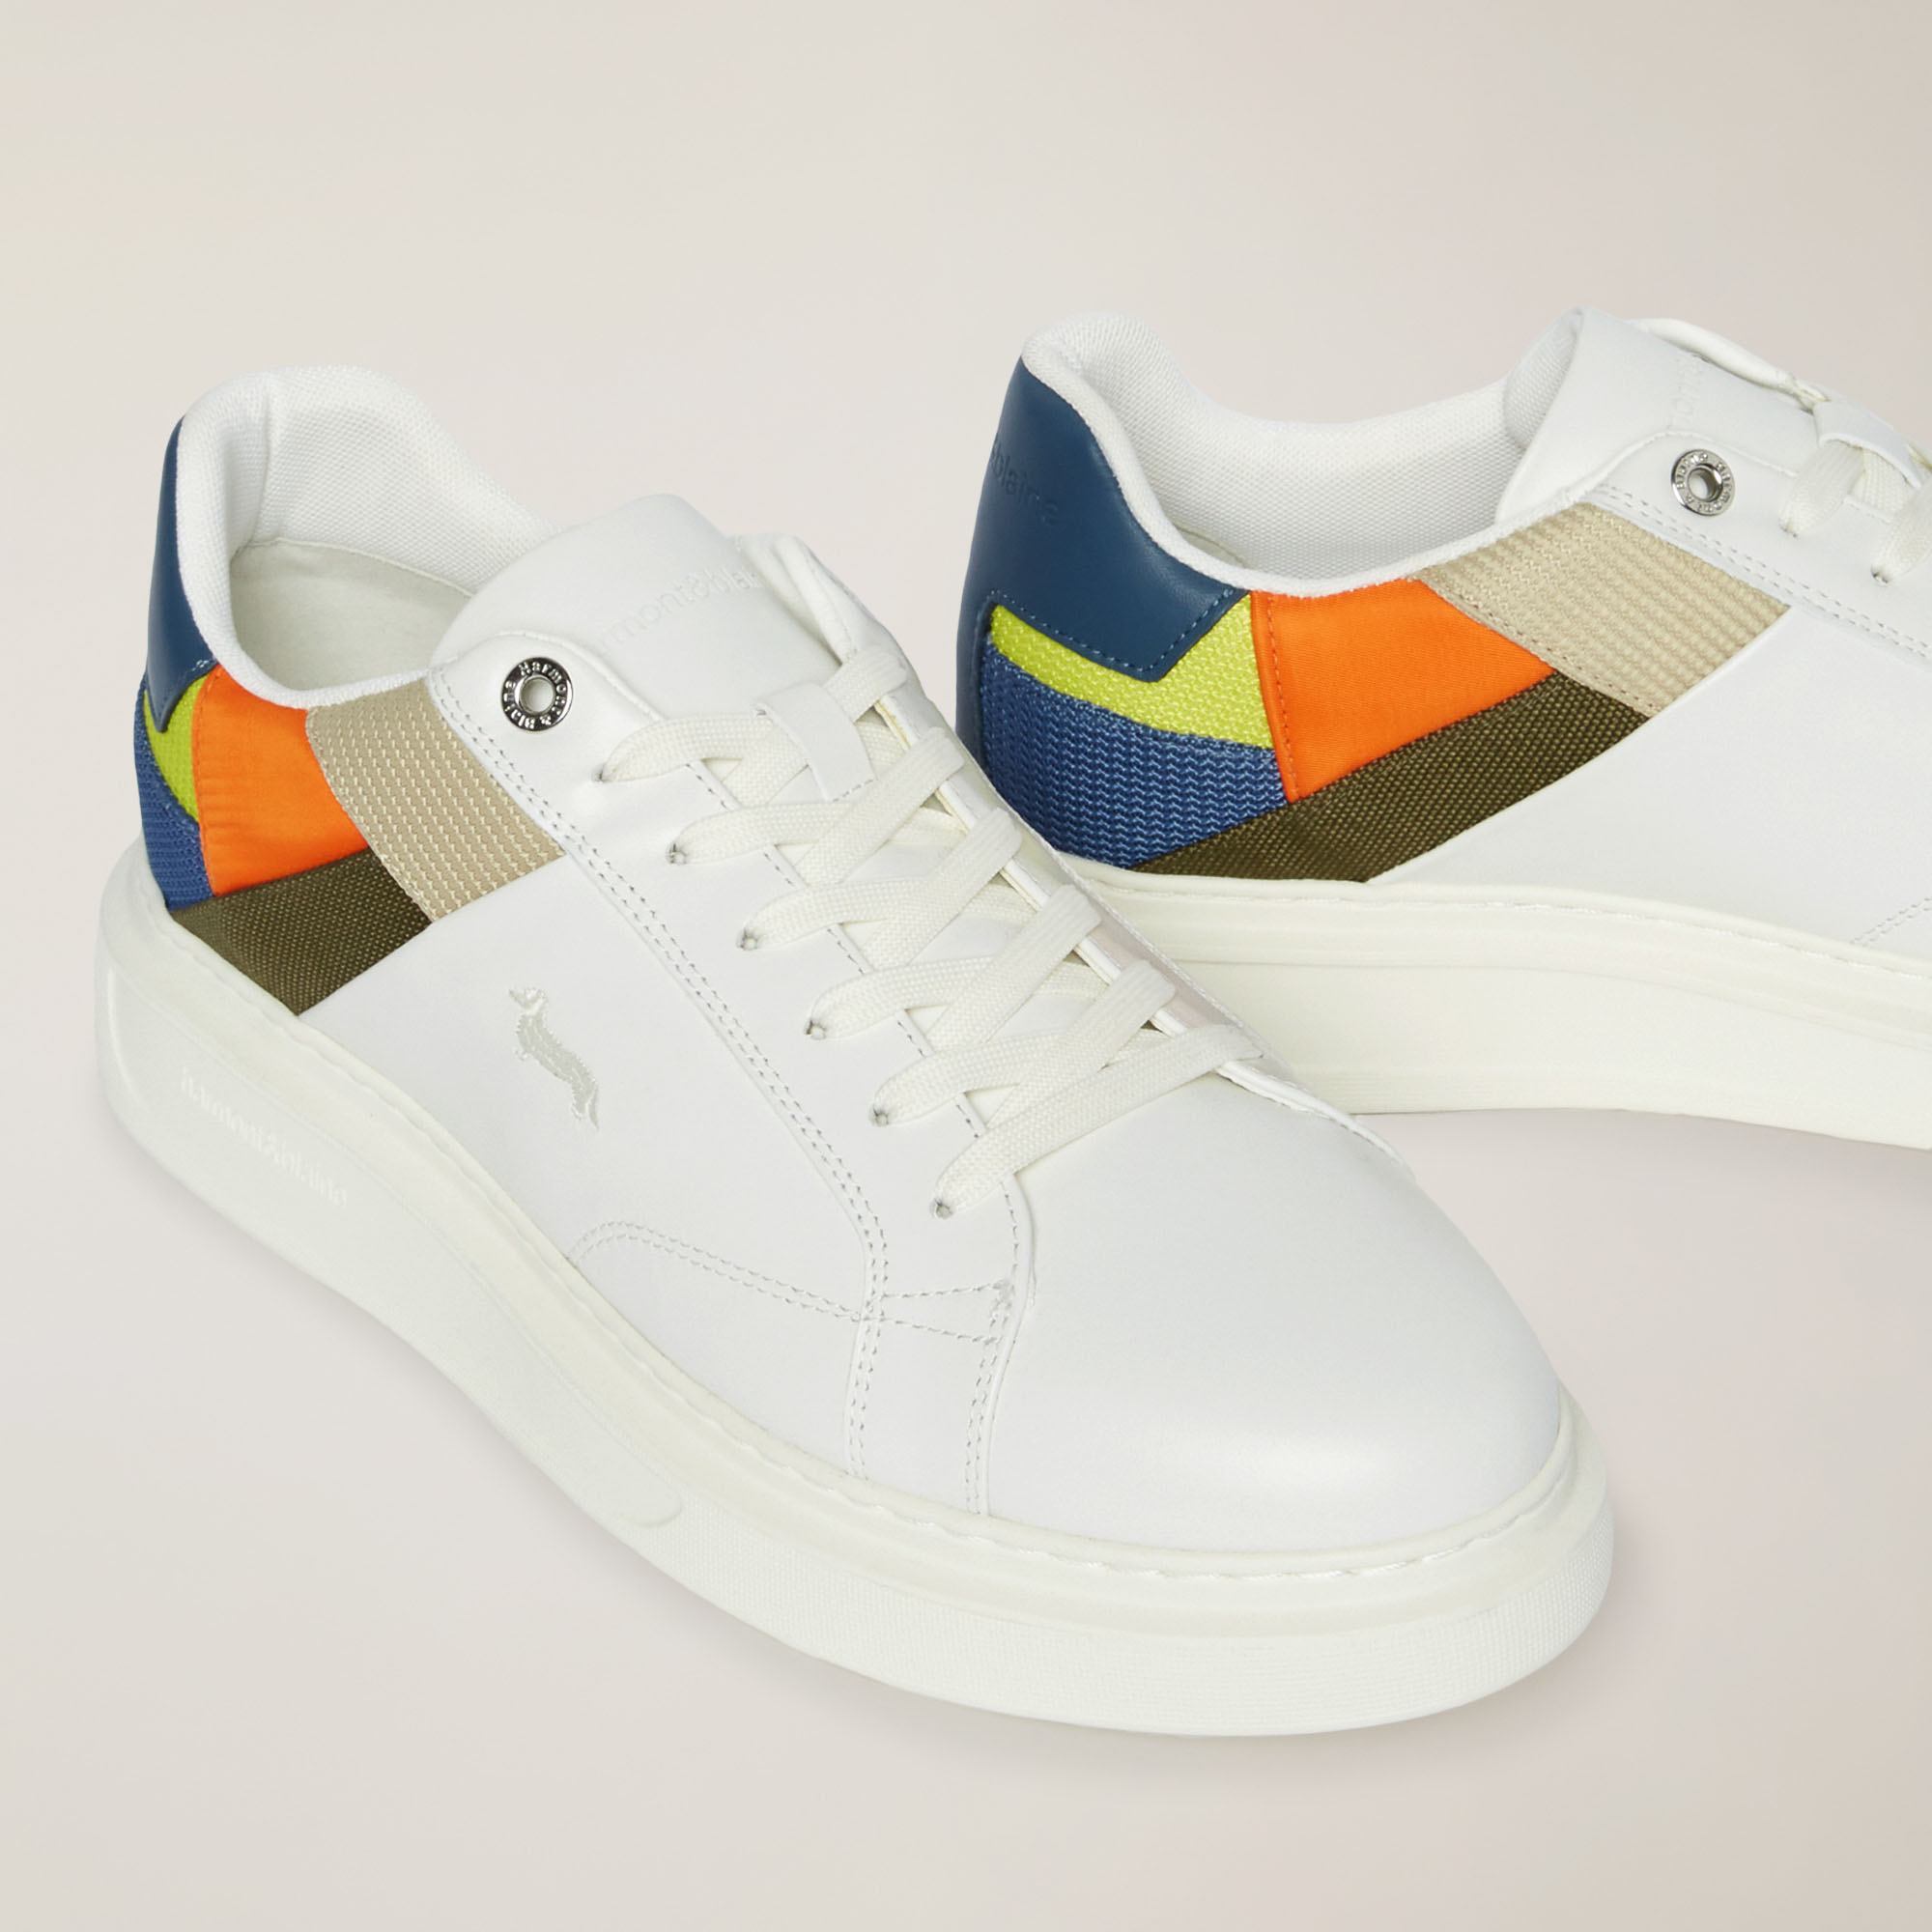 Sneaker with Patchwork Inserts, White/Multicolor, large image number 3